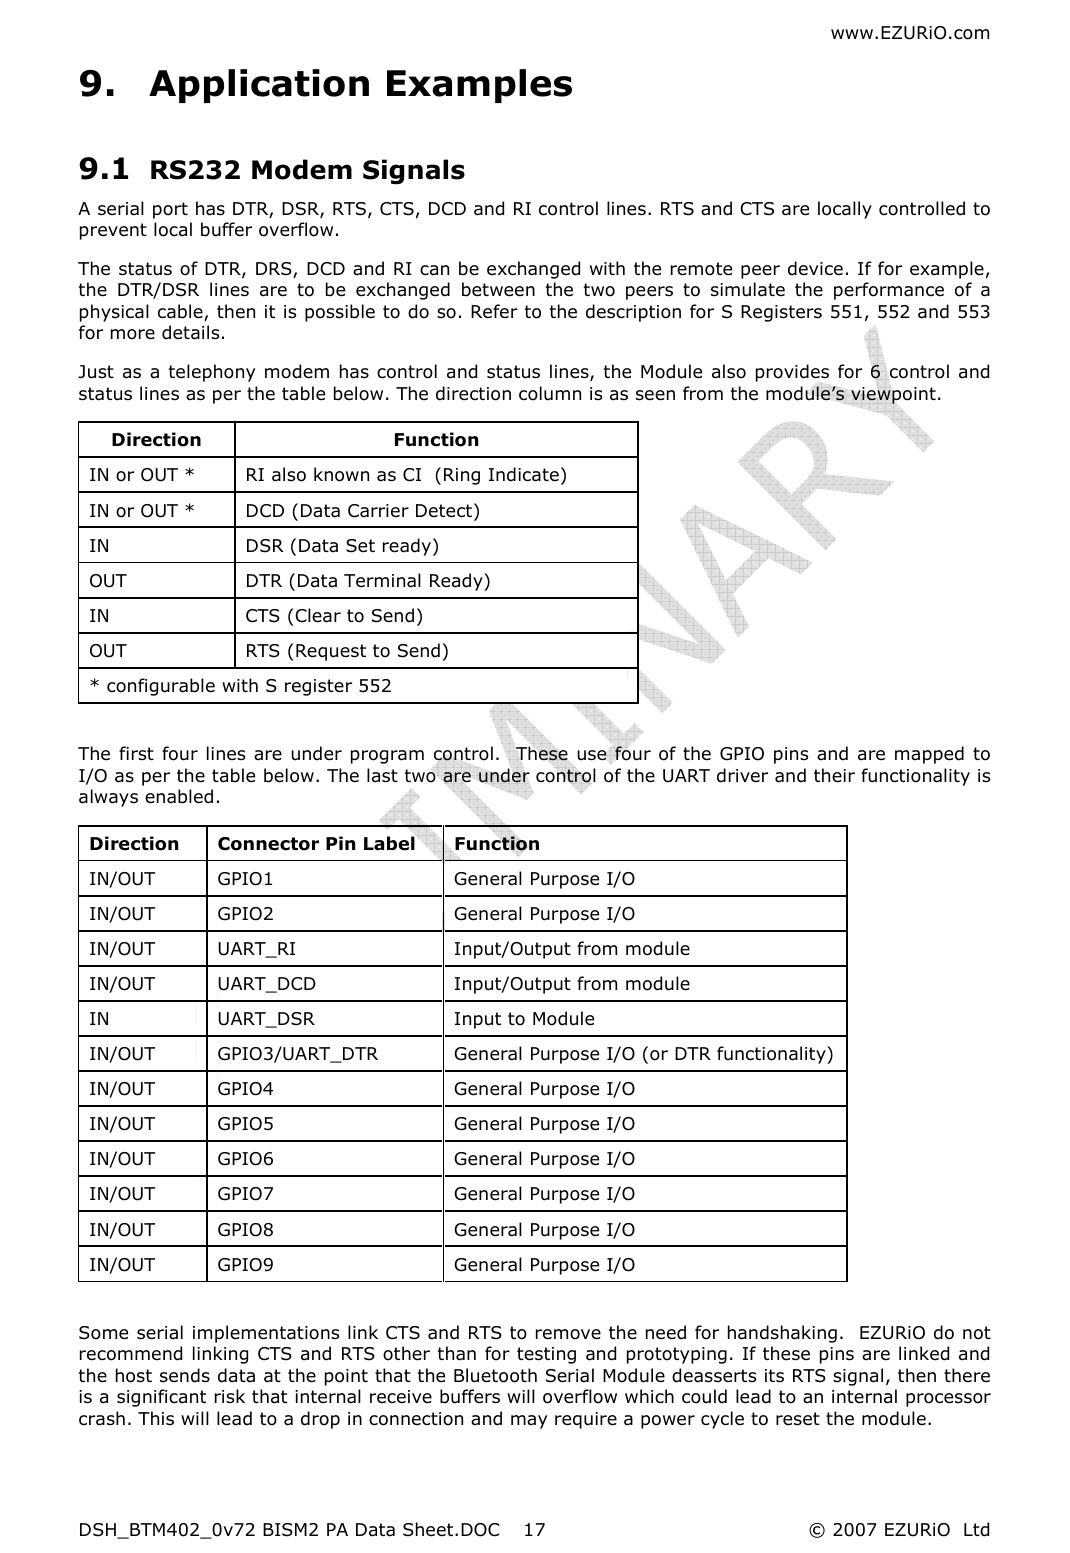 www.EZURiO.com DSH_BTM402_0v72 BISM2 PA Data Sheet.DOC  © 2007 EZURiO  Ltd  179. Application Examples 9.1 RS232 Modem Signals A serial port has DTR, DSR, RTS, CTS, DCD and RI control lines. RTS and CTS are locally controlled to prevent local buffer overflow. The status of DTR, DRS, DCD and RI can be exchanged with the remote peer device. If for example, the  DTR/DSR  lines  are  to  be  exchanged  between  the  two  peers  to  simulate  the  performance  of  a physical cable, then it is possible to do so. Refer to the description for S Registers 551, 552 and 553 for more details. Just as a telephony modem has control and status lines, the Module also provides for 6  control and status lines as per the table below. The direction column is as seen from the module’s viewpoint. Direction  Function IN or OUT *  RI also known as CI  (Ring Indicate) IN or OUT *  DCD (Data Carrier Detect) IN  DSR (Data Set ready) OUT  DTR (Data Terminal Ready) IN  CTS (Clear to Send) OUT  RTS (Request to Send) * configurable with S register 552  The first four lines are under program control.  These use four of the GPIO pins and are mapped to I/O as per the table below. The last two are under control of the UART driver and their functionality is always enabled. Direction  Connector Pin Label  Function IN/OUT  GPIO1  General Purpose I/O IN/OUT  GPIO2  General Purpose I/O IN/OUT  UART_RI  Input/Output from module IN/OUT  UART_DCD  Input/Output from module IN  UART_DSR  Input to Module IN/OUT  GPIO3/UART_DTR  General Purpose I/O (or DTR functionality) IN/OUT  GPIO4  General Purpose I/O  IN/OUT  GPIO5  General Purpose I/O  IN/OUT  GPIO6  General Purpose I/O  IN/OUT  GPIO7  General Purpose I/O  IN/OUT  GPIO8  General Purpose I/O  IN/OUT  GPIO9  General Purpose I/O   Some serial implementations link CTS and RTS to remove the need for handshaking.  EZURiO do not recommend linking CTS and RTS other than for testing and prototyping. If these pins are linked and the host sends data at the point that the Bluetooth Serial Module deasserts its RTS signal, then there is a significant risk that internal receive buffers will overflow which could lead to an internal processor crash. This will lead to a drop in connection and may require a power cycle to reset the module.  